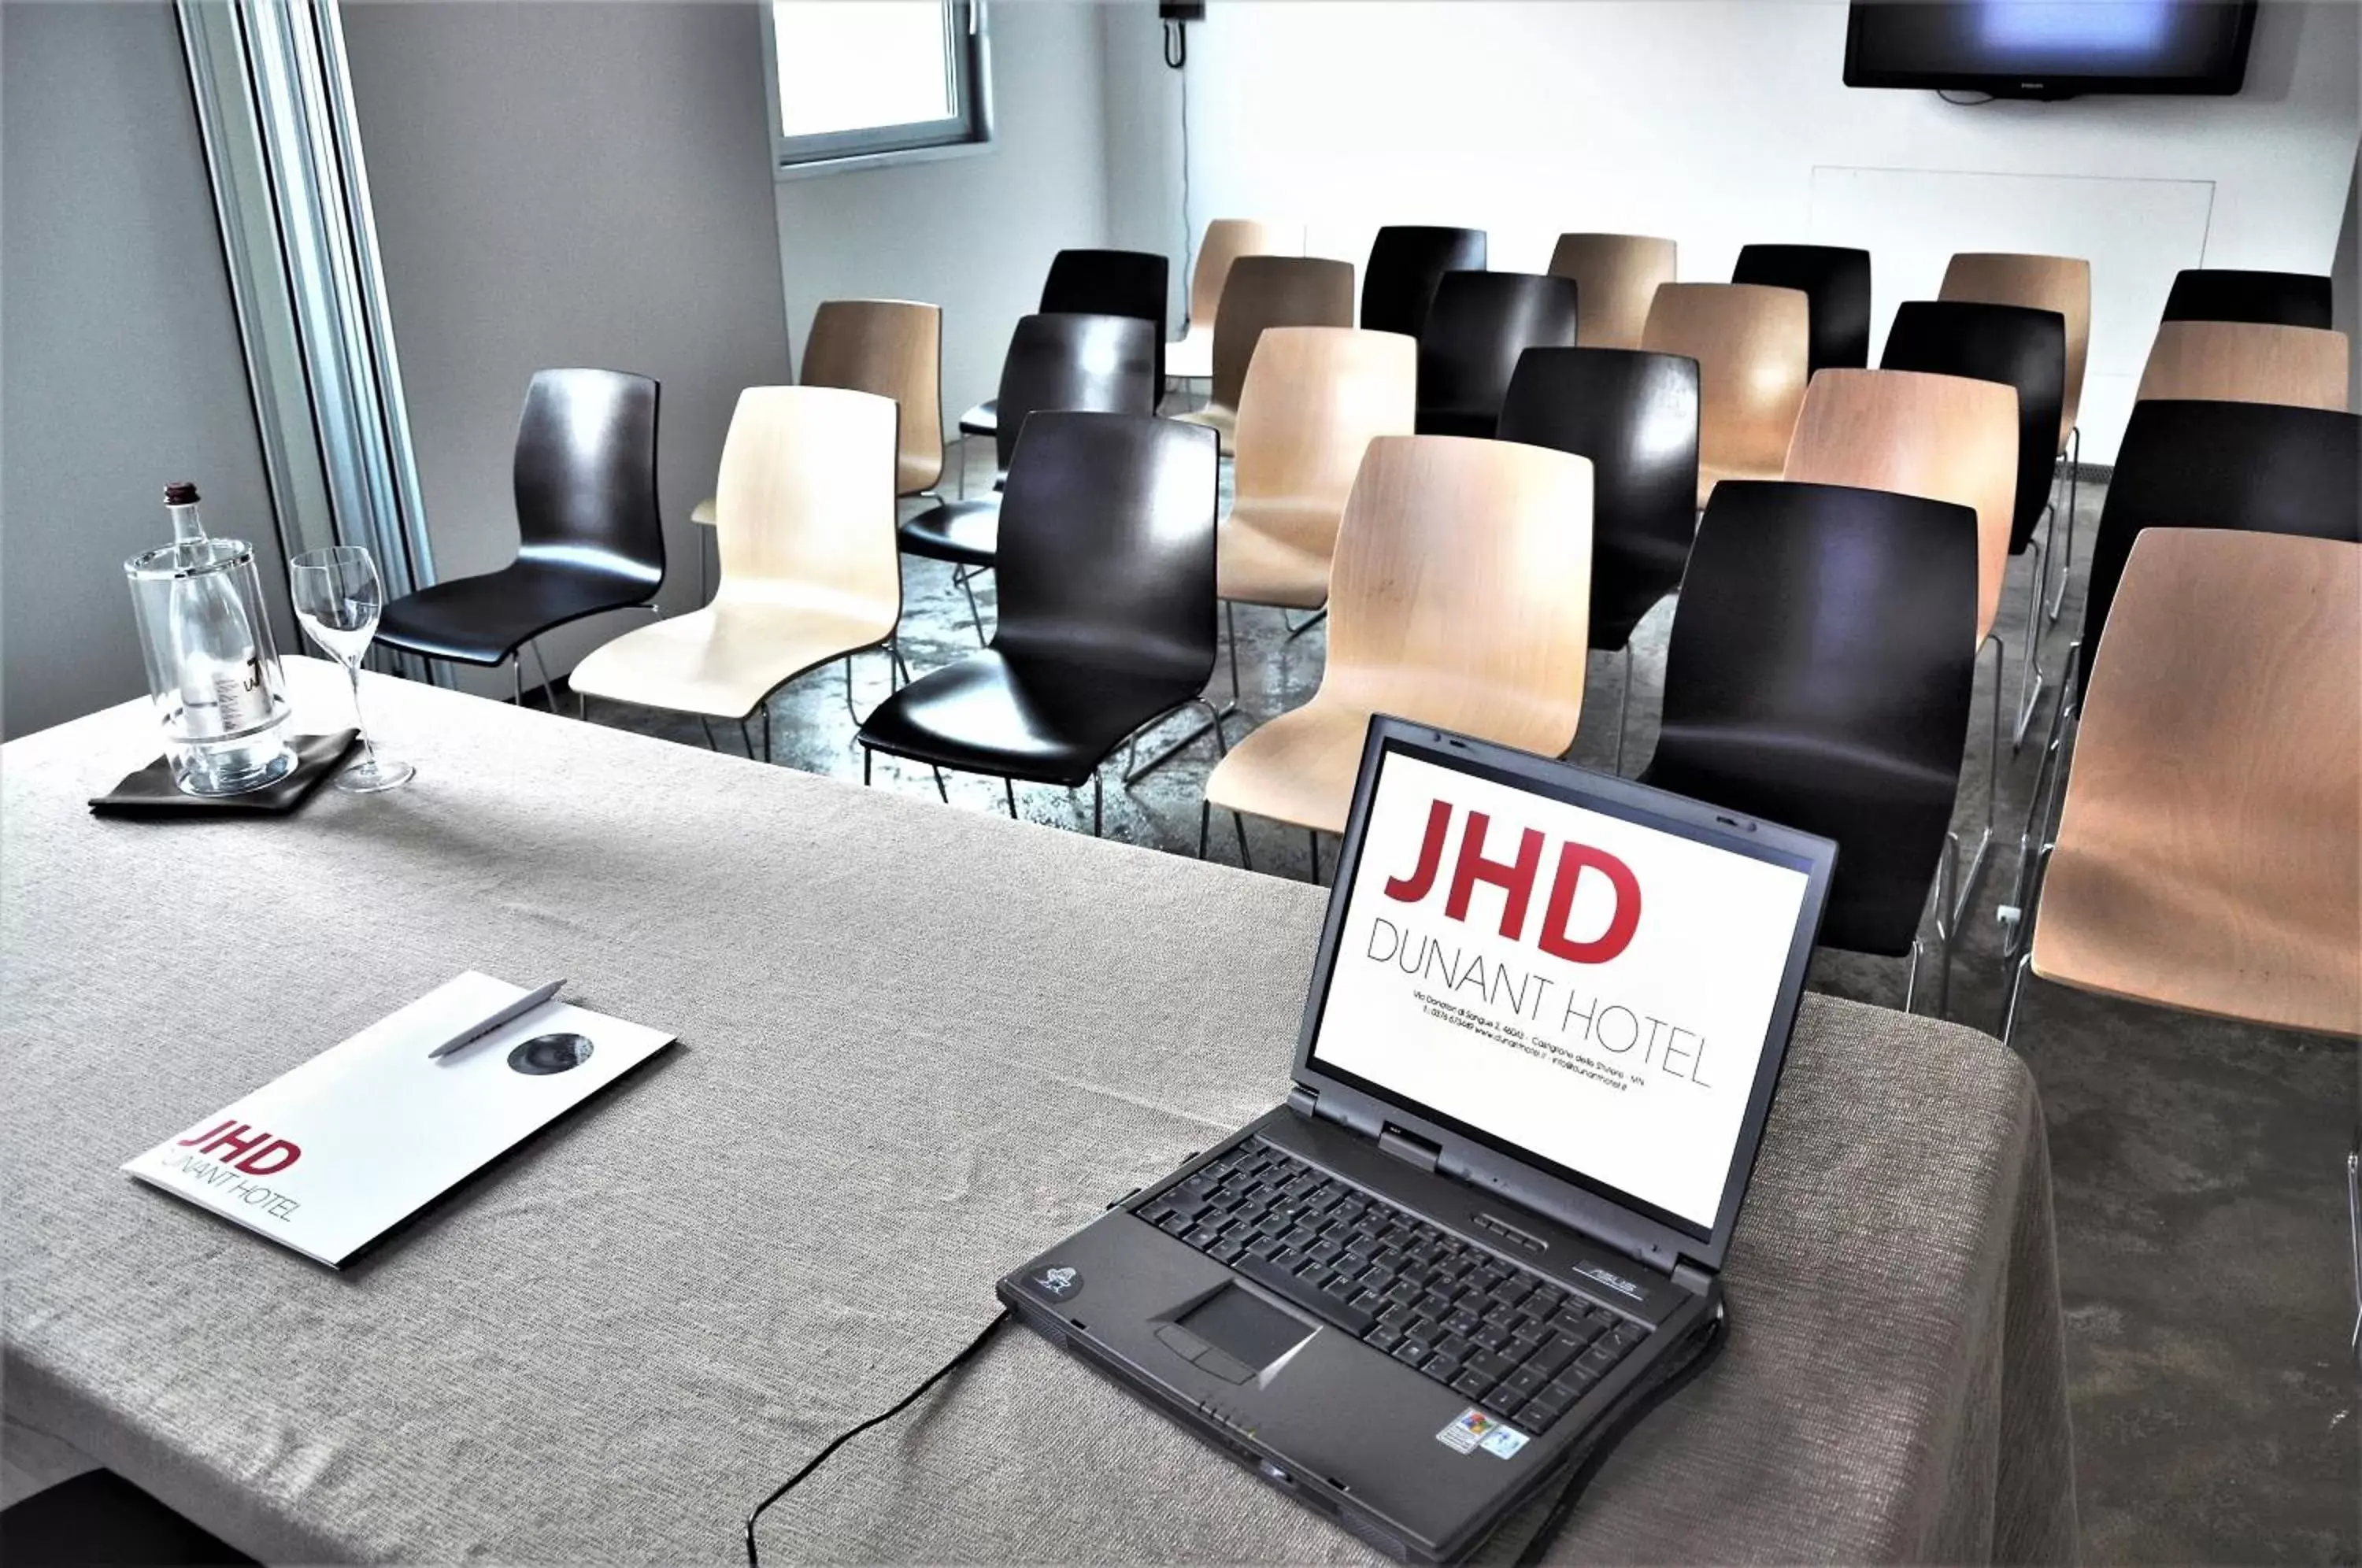 Business facilities in Aiden by Best Western @ JHD Dunant Hotel